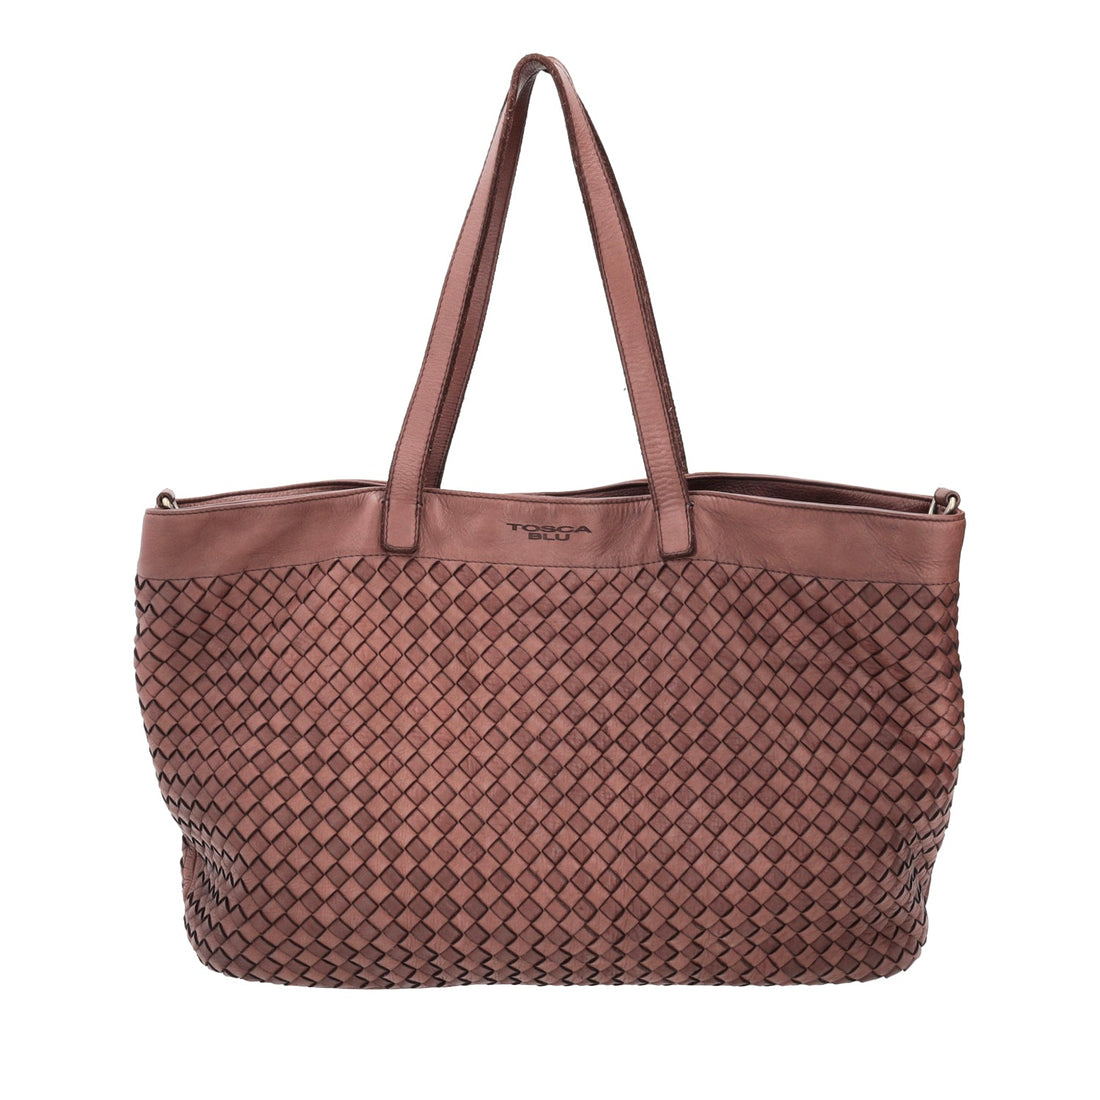 DARK BROWN PAPAVERO SHOPPING BAG IN WOVEN LEATHER